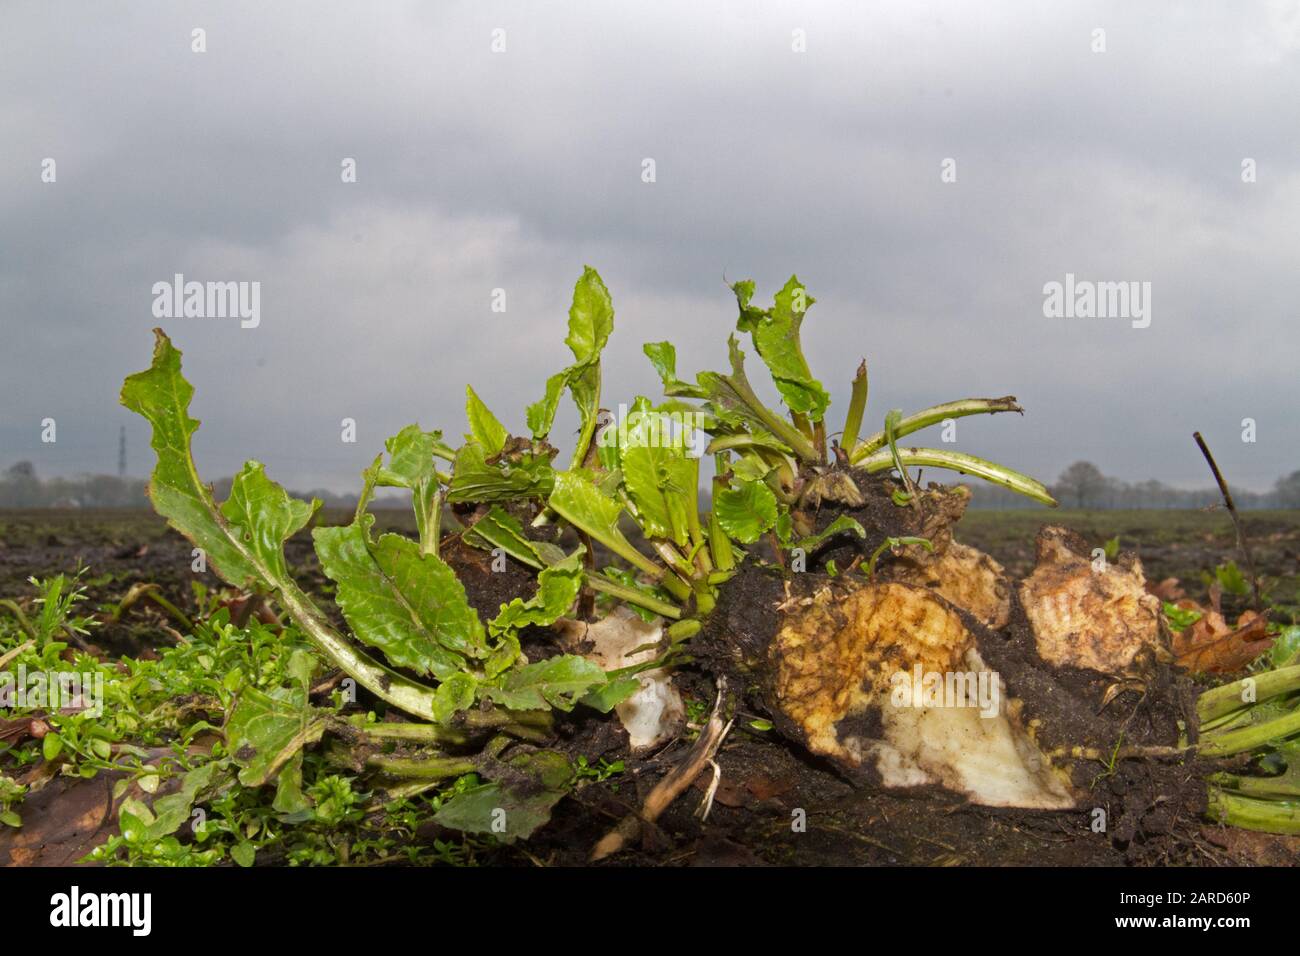 Small sugarbeets on a field, gnawed by mice or rabbits Stock Photo